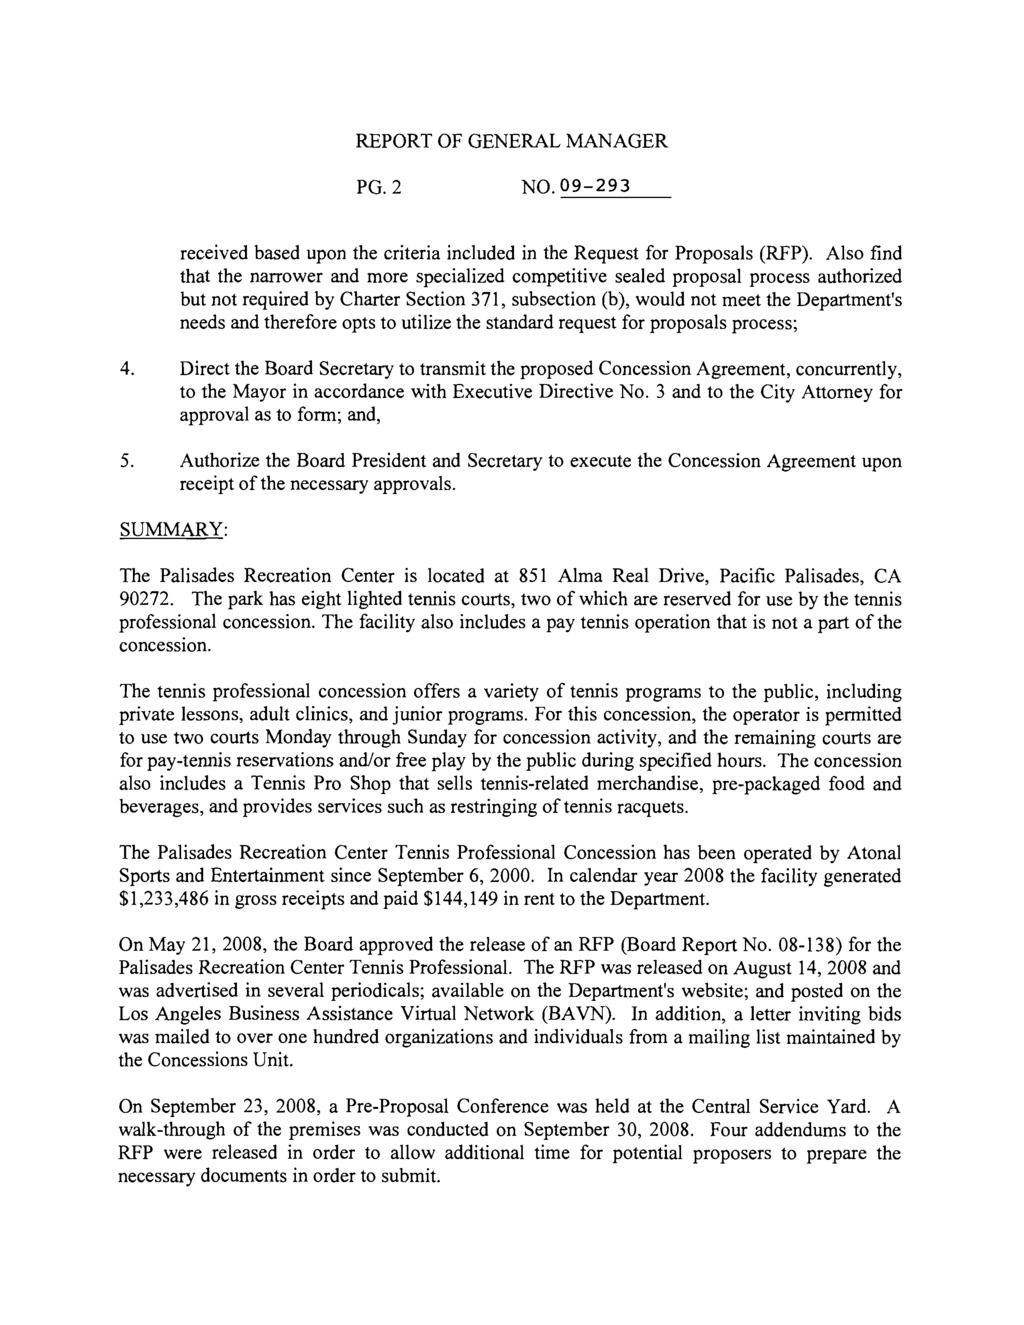 REPORT OF GENERAL MANAGER PG. 2 NO. 09-293 received based upon the criteria included in the Request for Proposals (RFP).